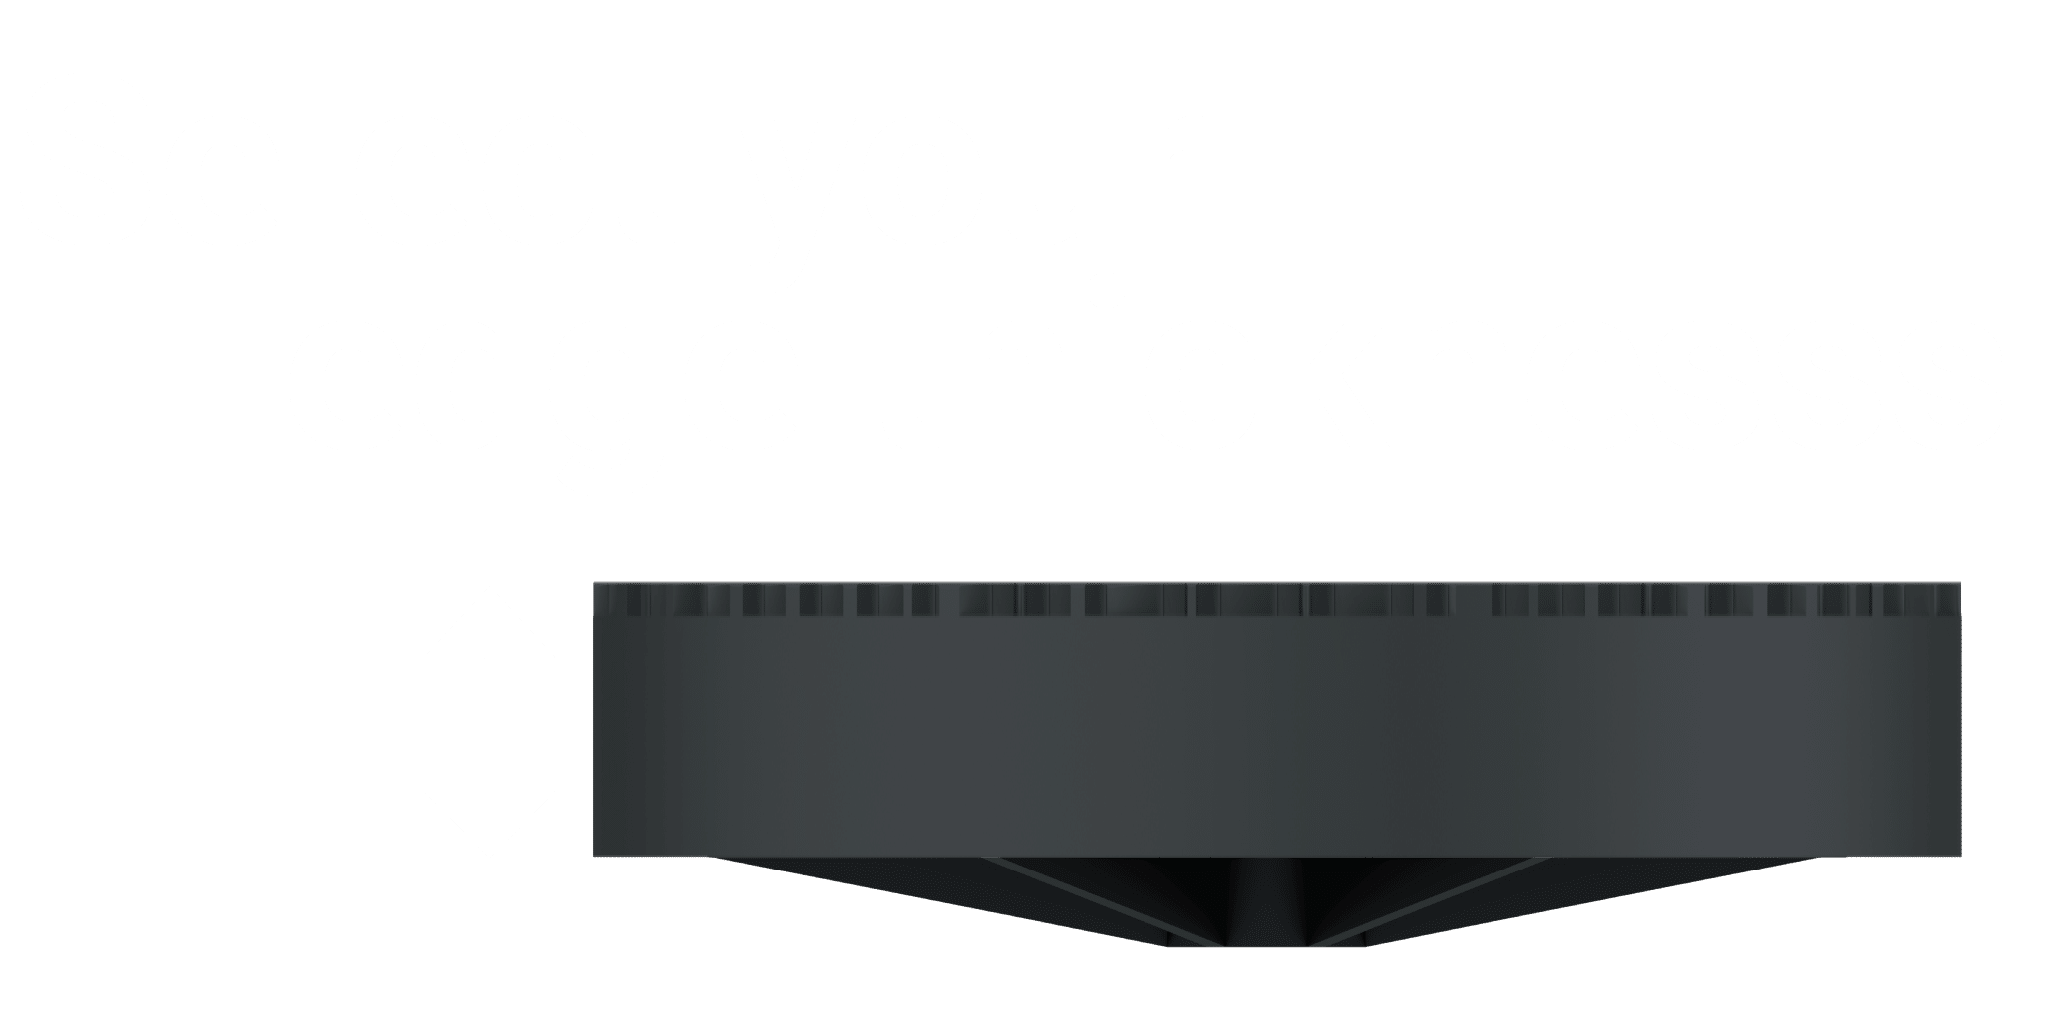 Select your edge thickness